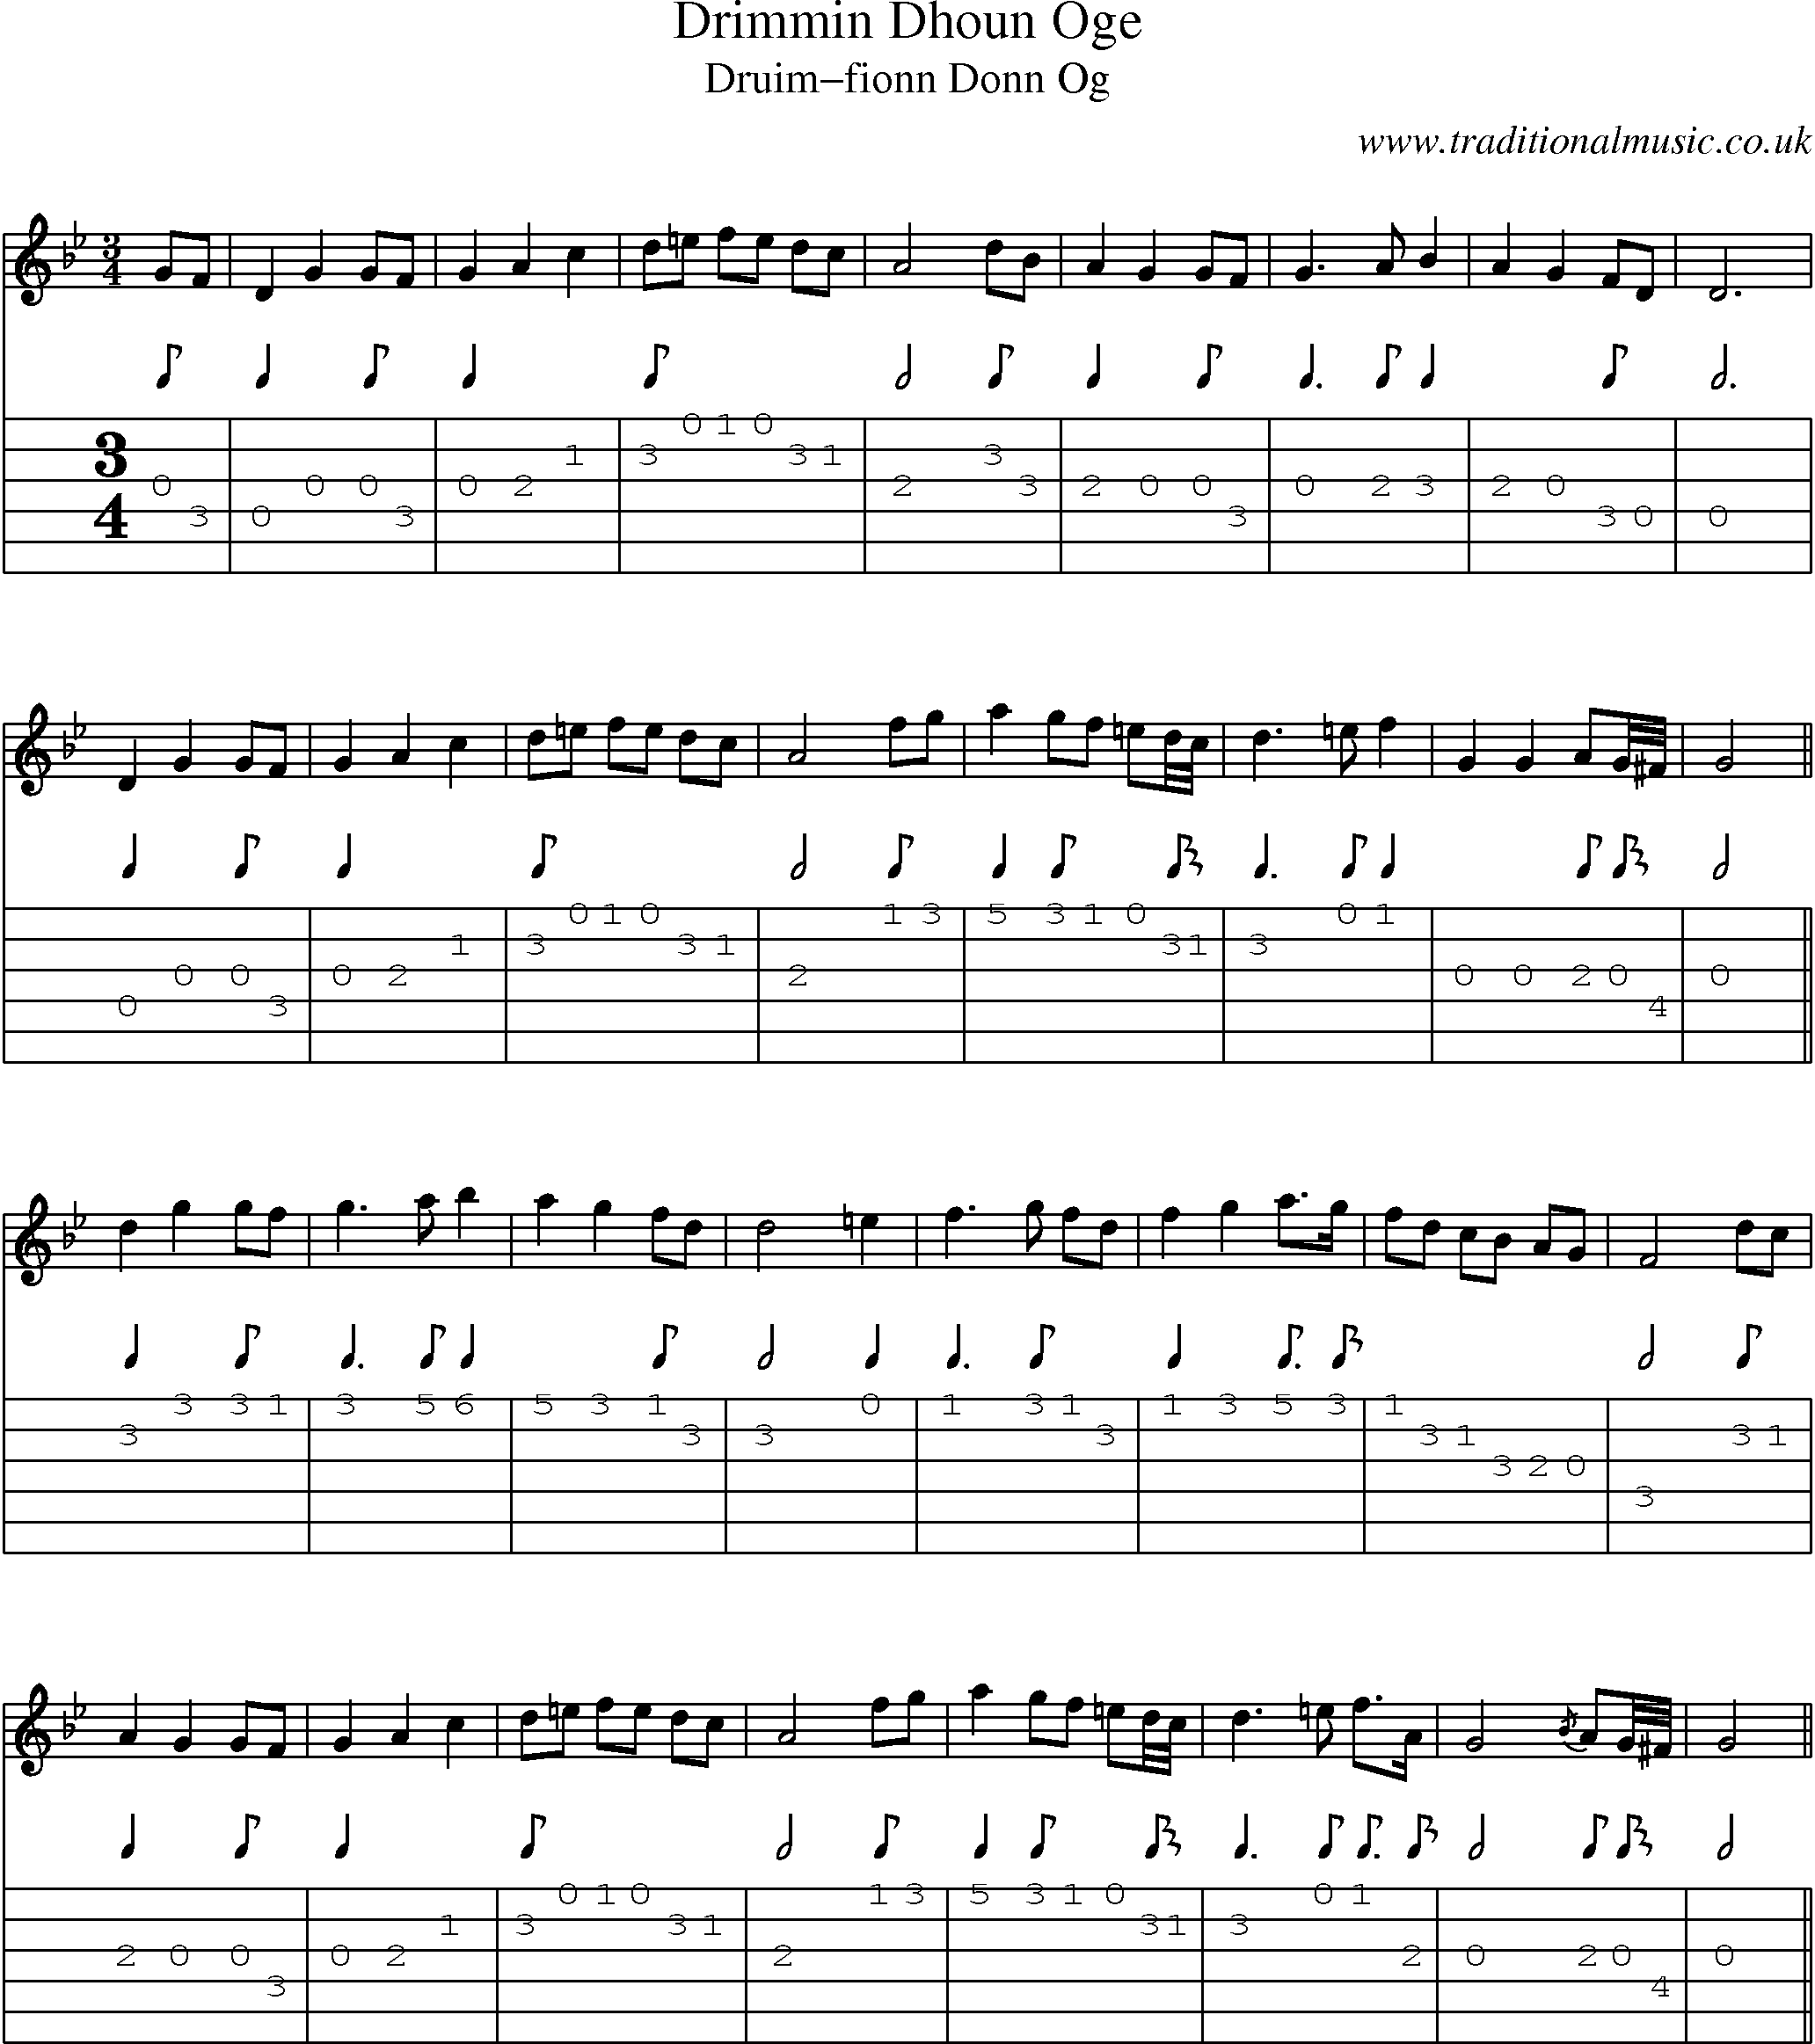 Music Score and Guitar Tabs for Drimmin Dhoun Oge